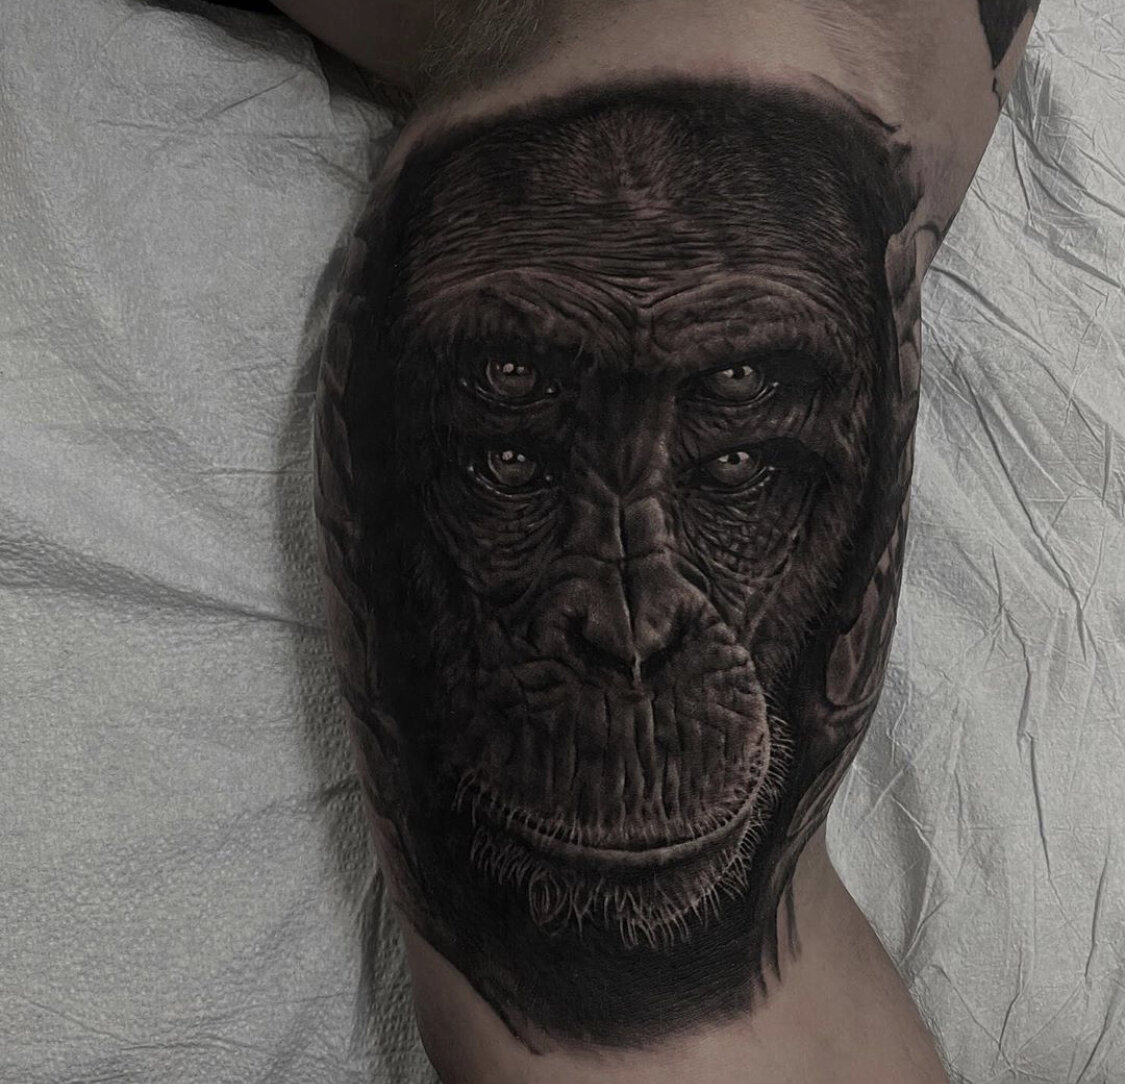 Ceasar rise of the planet of the apes tattoo by onksy on DeviantArt